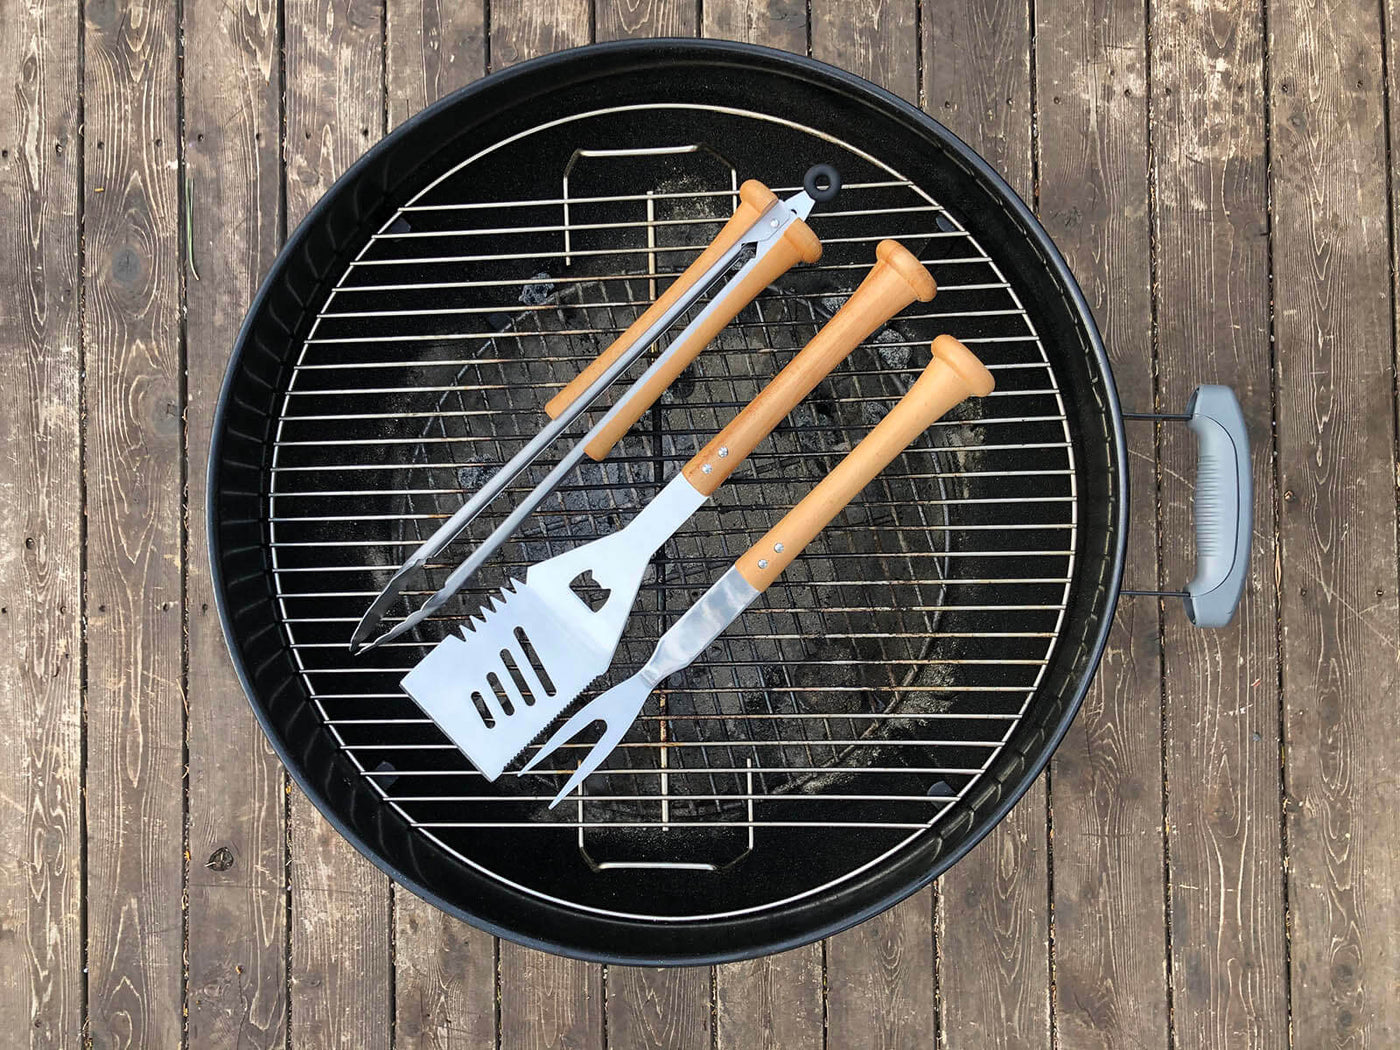 Baseball BBQ grill tools set made with wood baseball bat handles, available with custom personalization. Perfect gift for baseball fans.